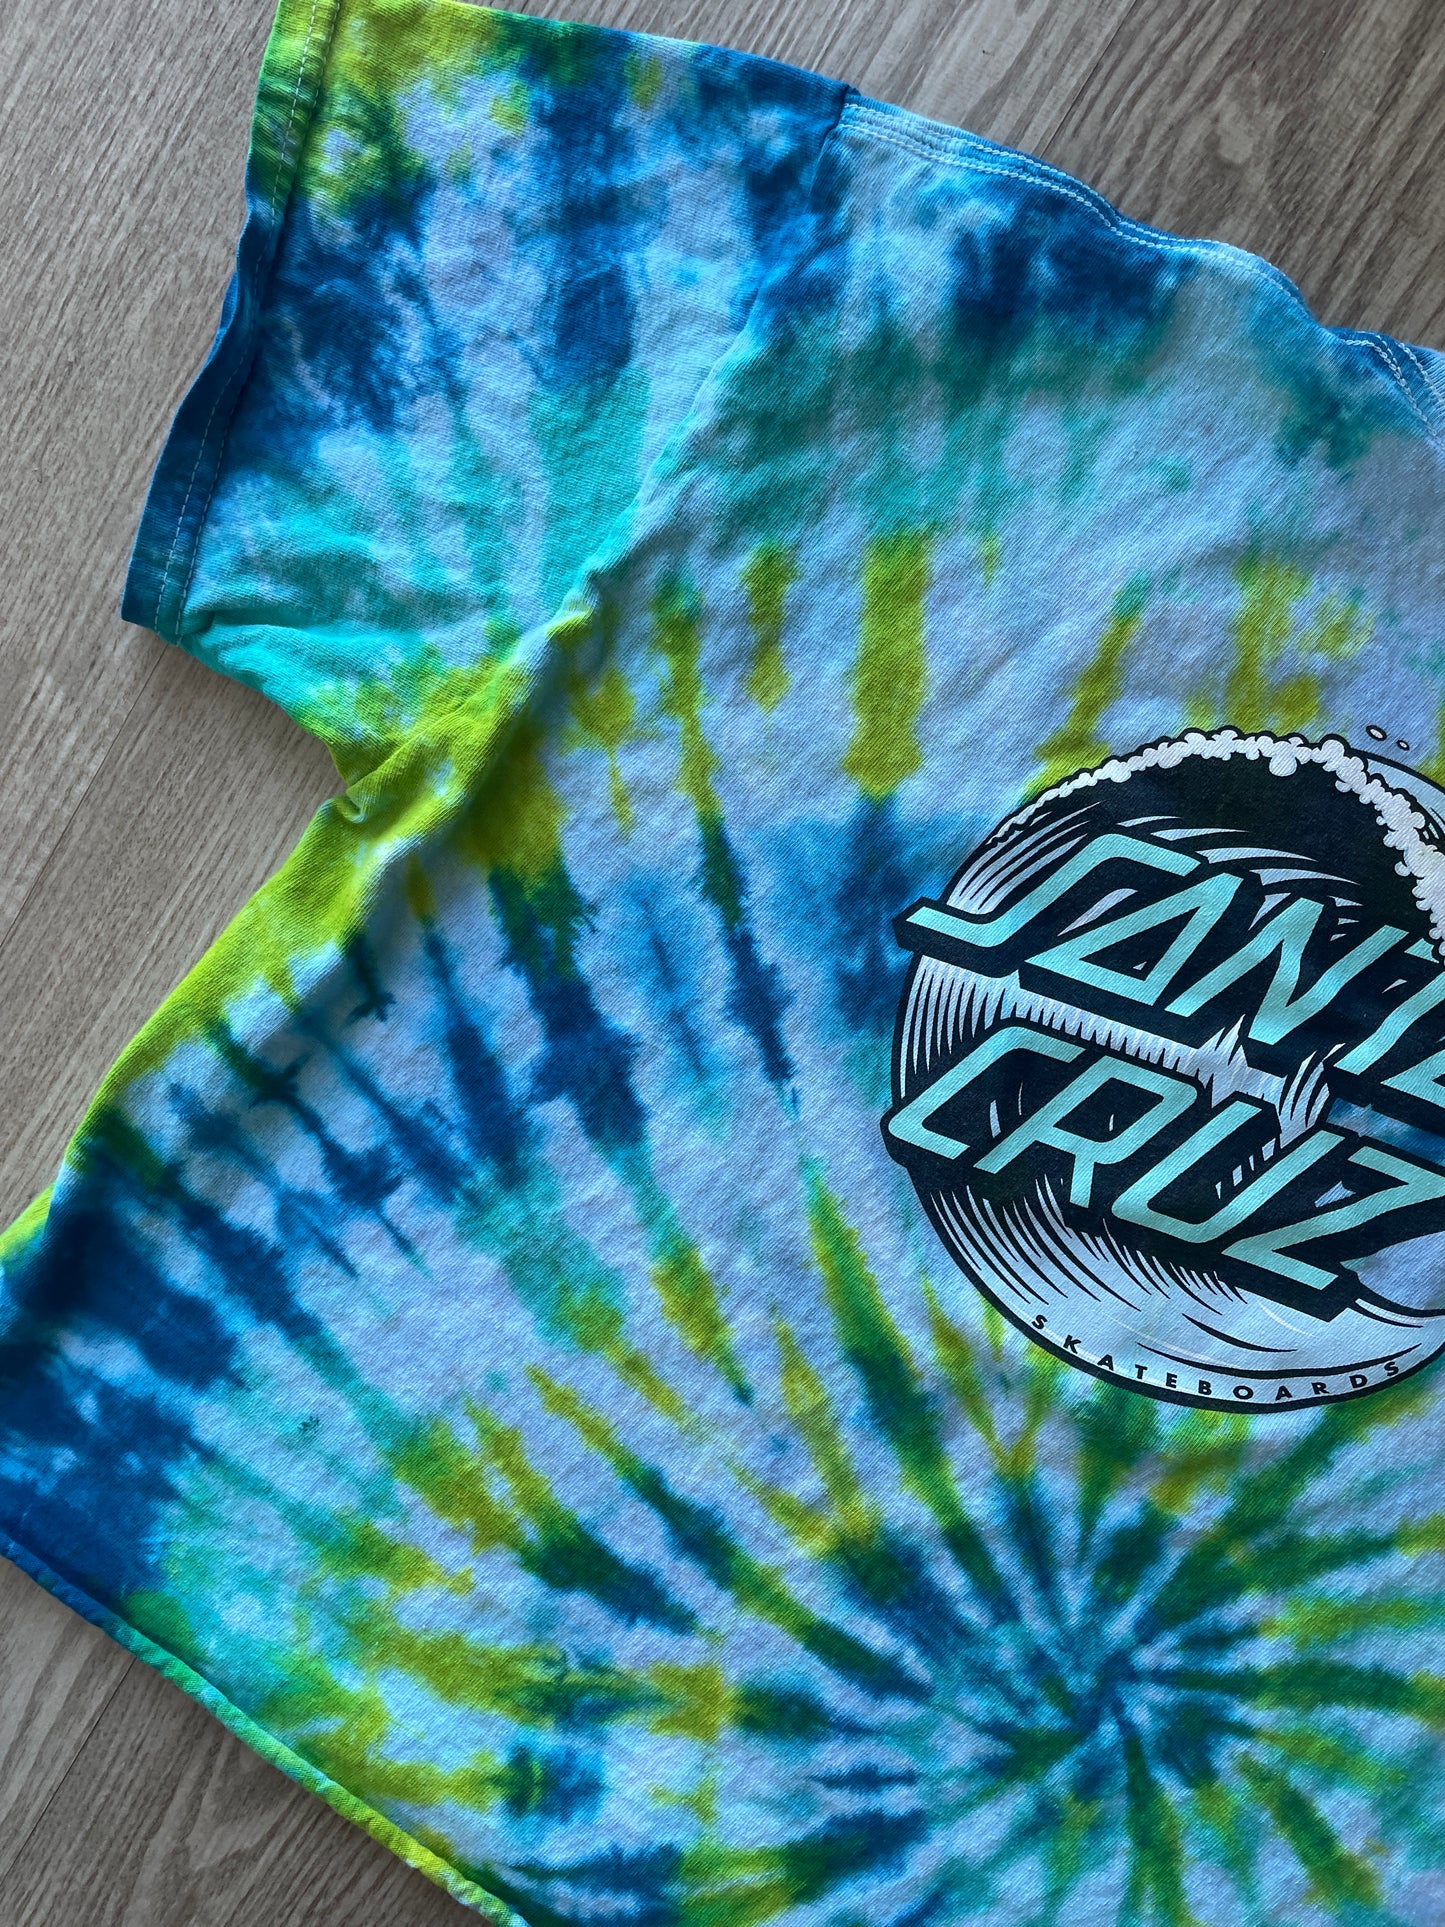 LARGE Men’s Santa Cruz Tie Dye Short Sleeve Crop Top | One-Of-a-Kind Upcycled Green and Blue Spiral Top